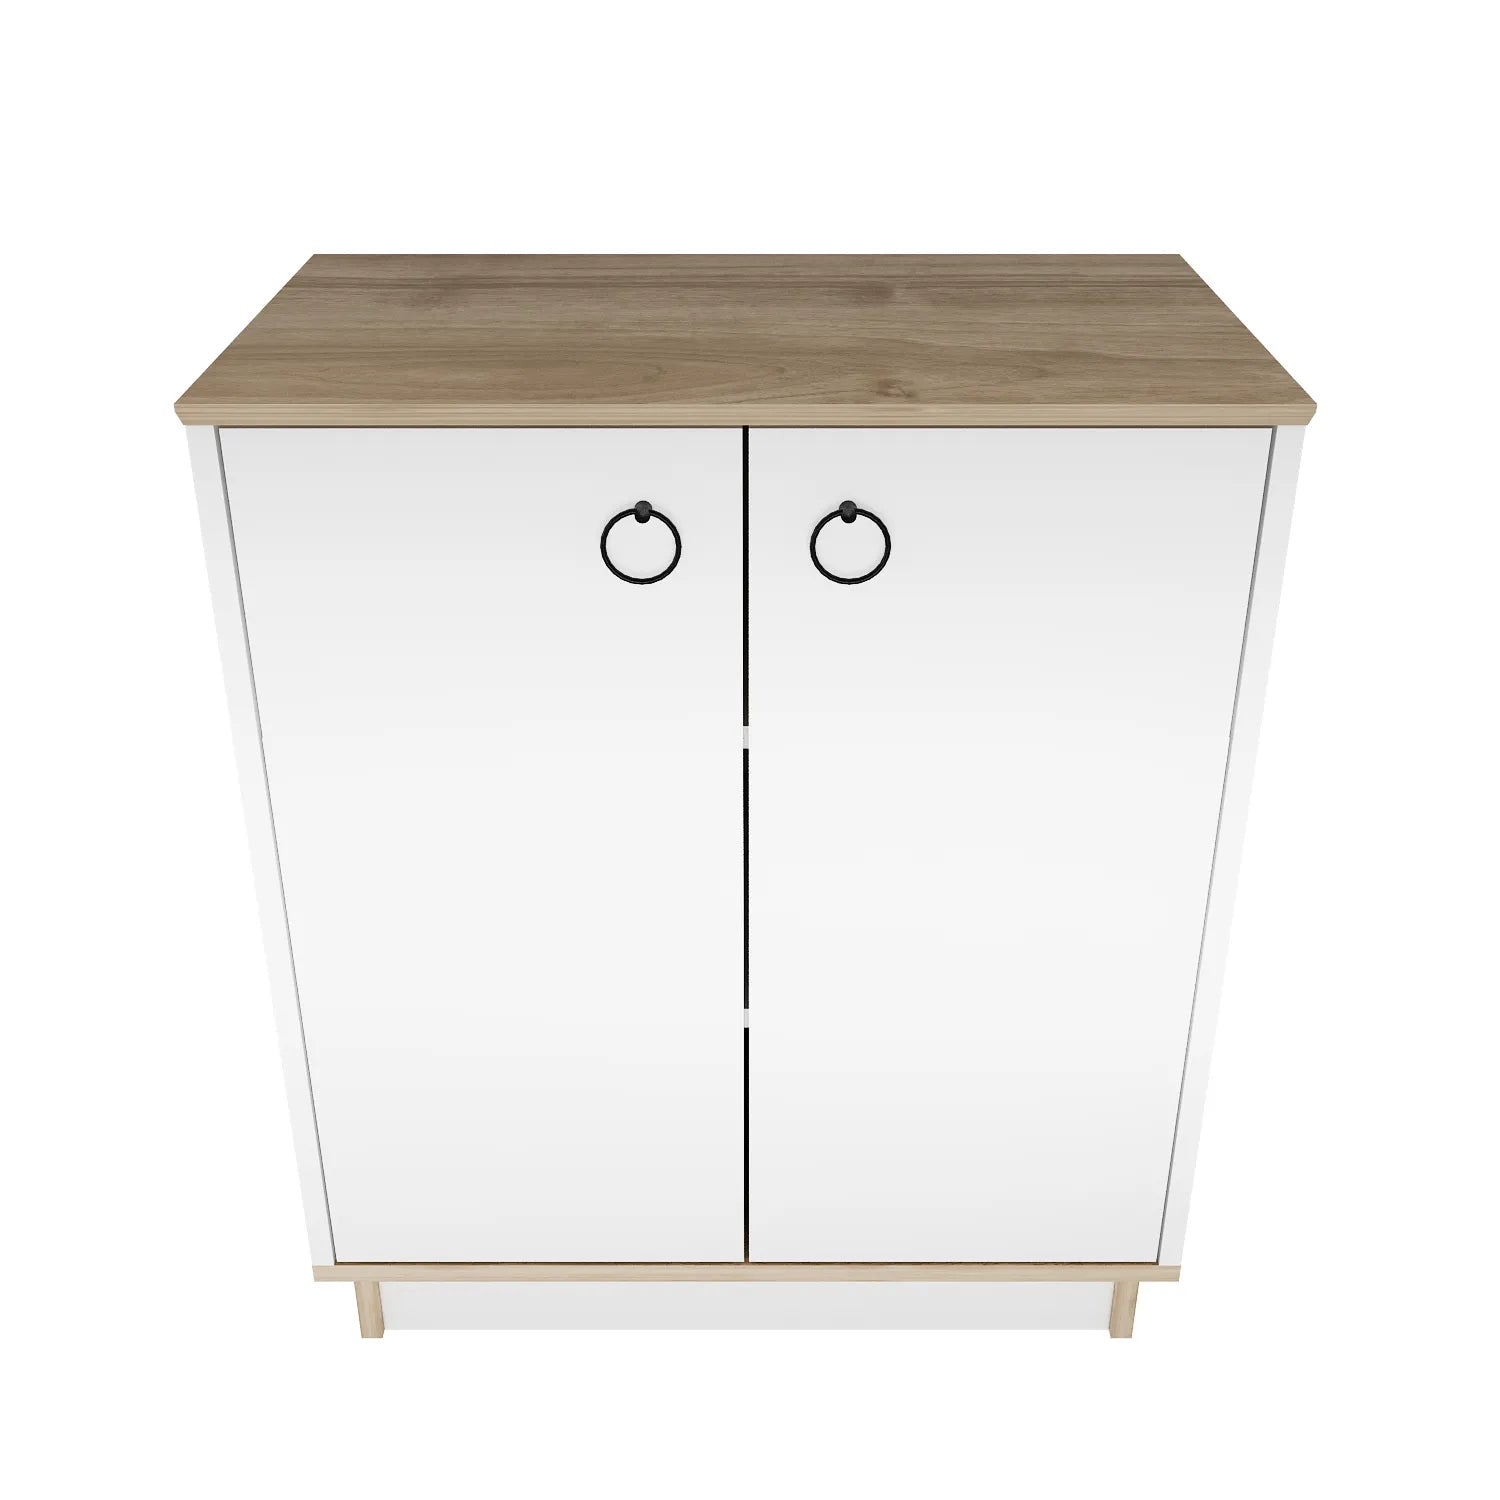 Nuanse Storage Cabinet with Doors | Accent Cabinet | Shoe Rack